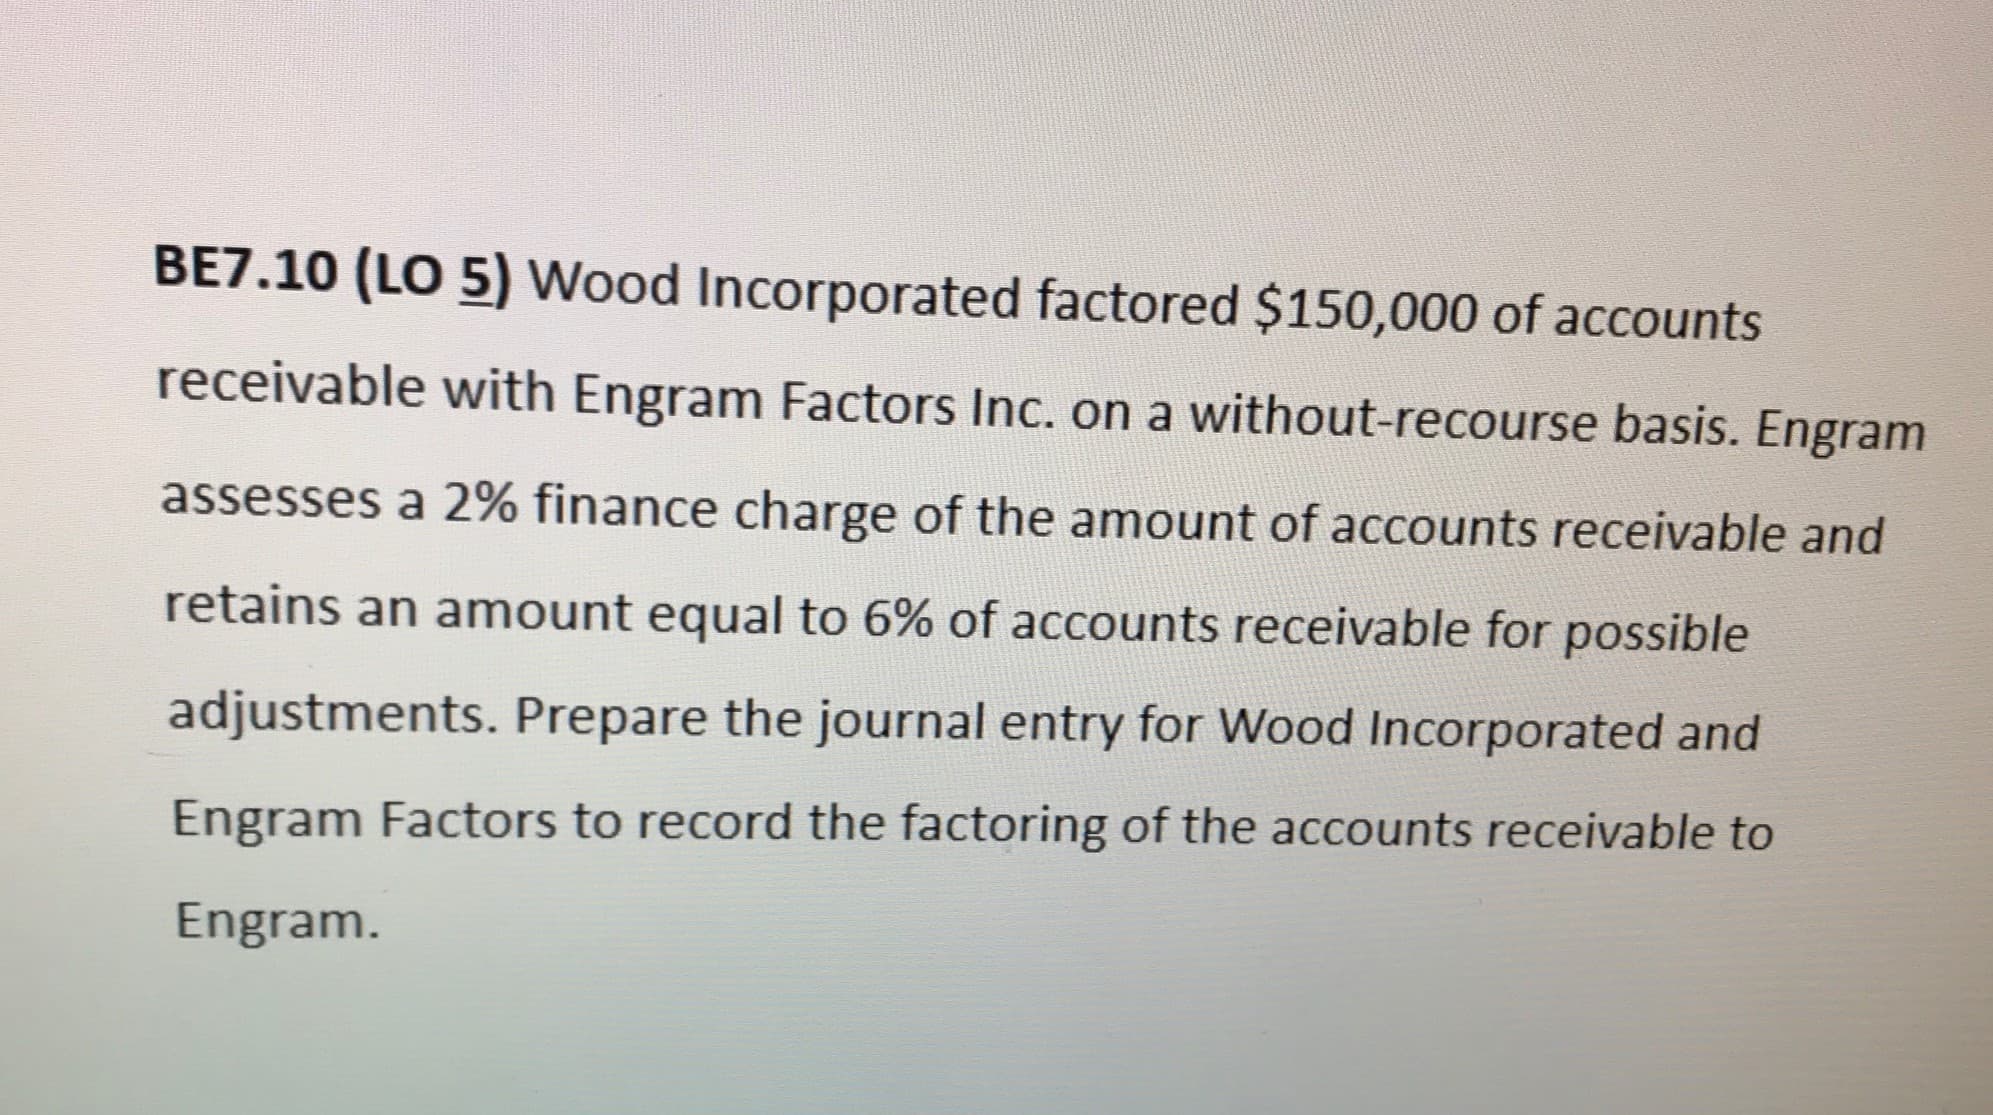 BE7.10 (LO 5) Wood Incorporated factored $150,000 of accounts
receivable with Engram Factors Inc. on a without-recourse basis. Engram
assesses a 2% finance charge of the amount of accounts receivable and
retains an amount equal to 6% of accounts receivable for possible
adjustments. Prepare the journal entry for Wood Incorporated and
Engram Factors to record the factoring of the accounts receivable to
Engram.
